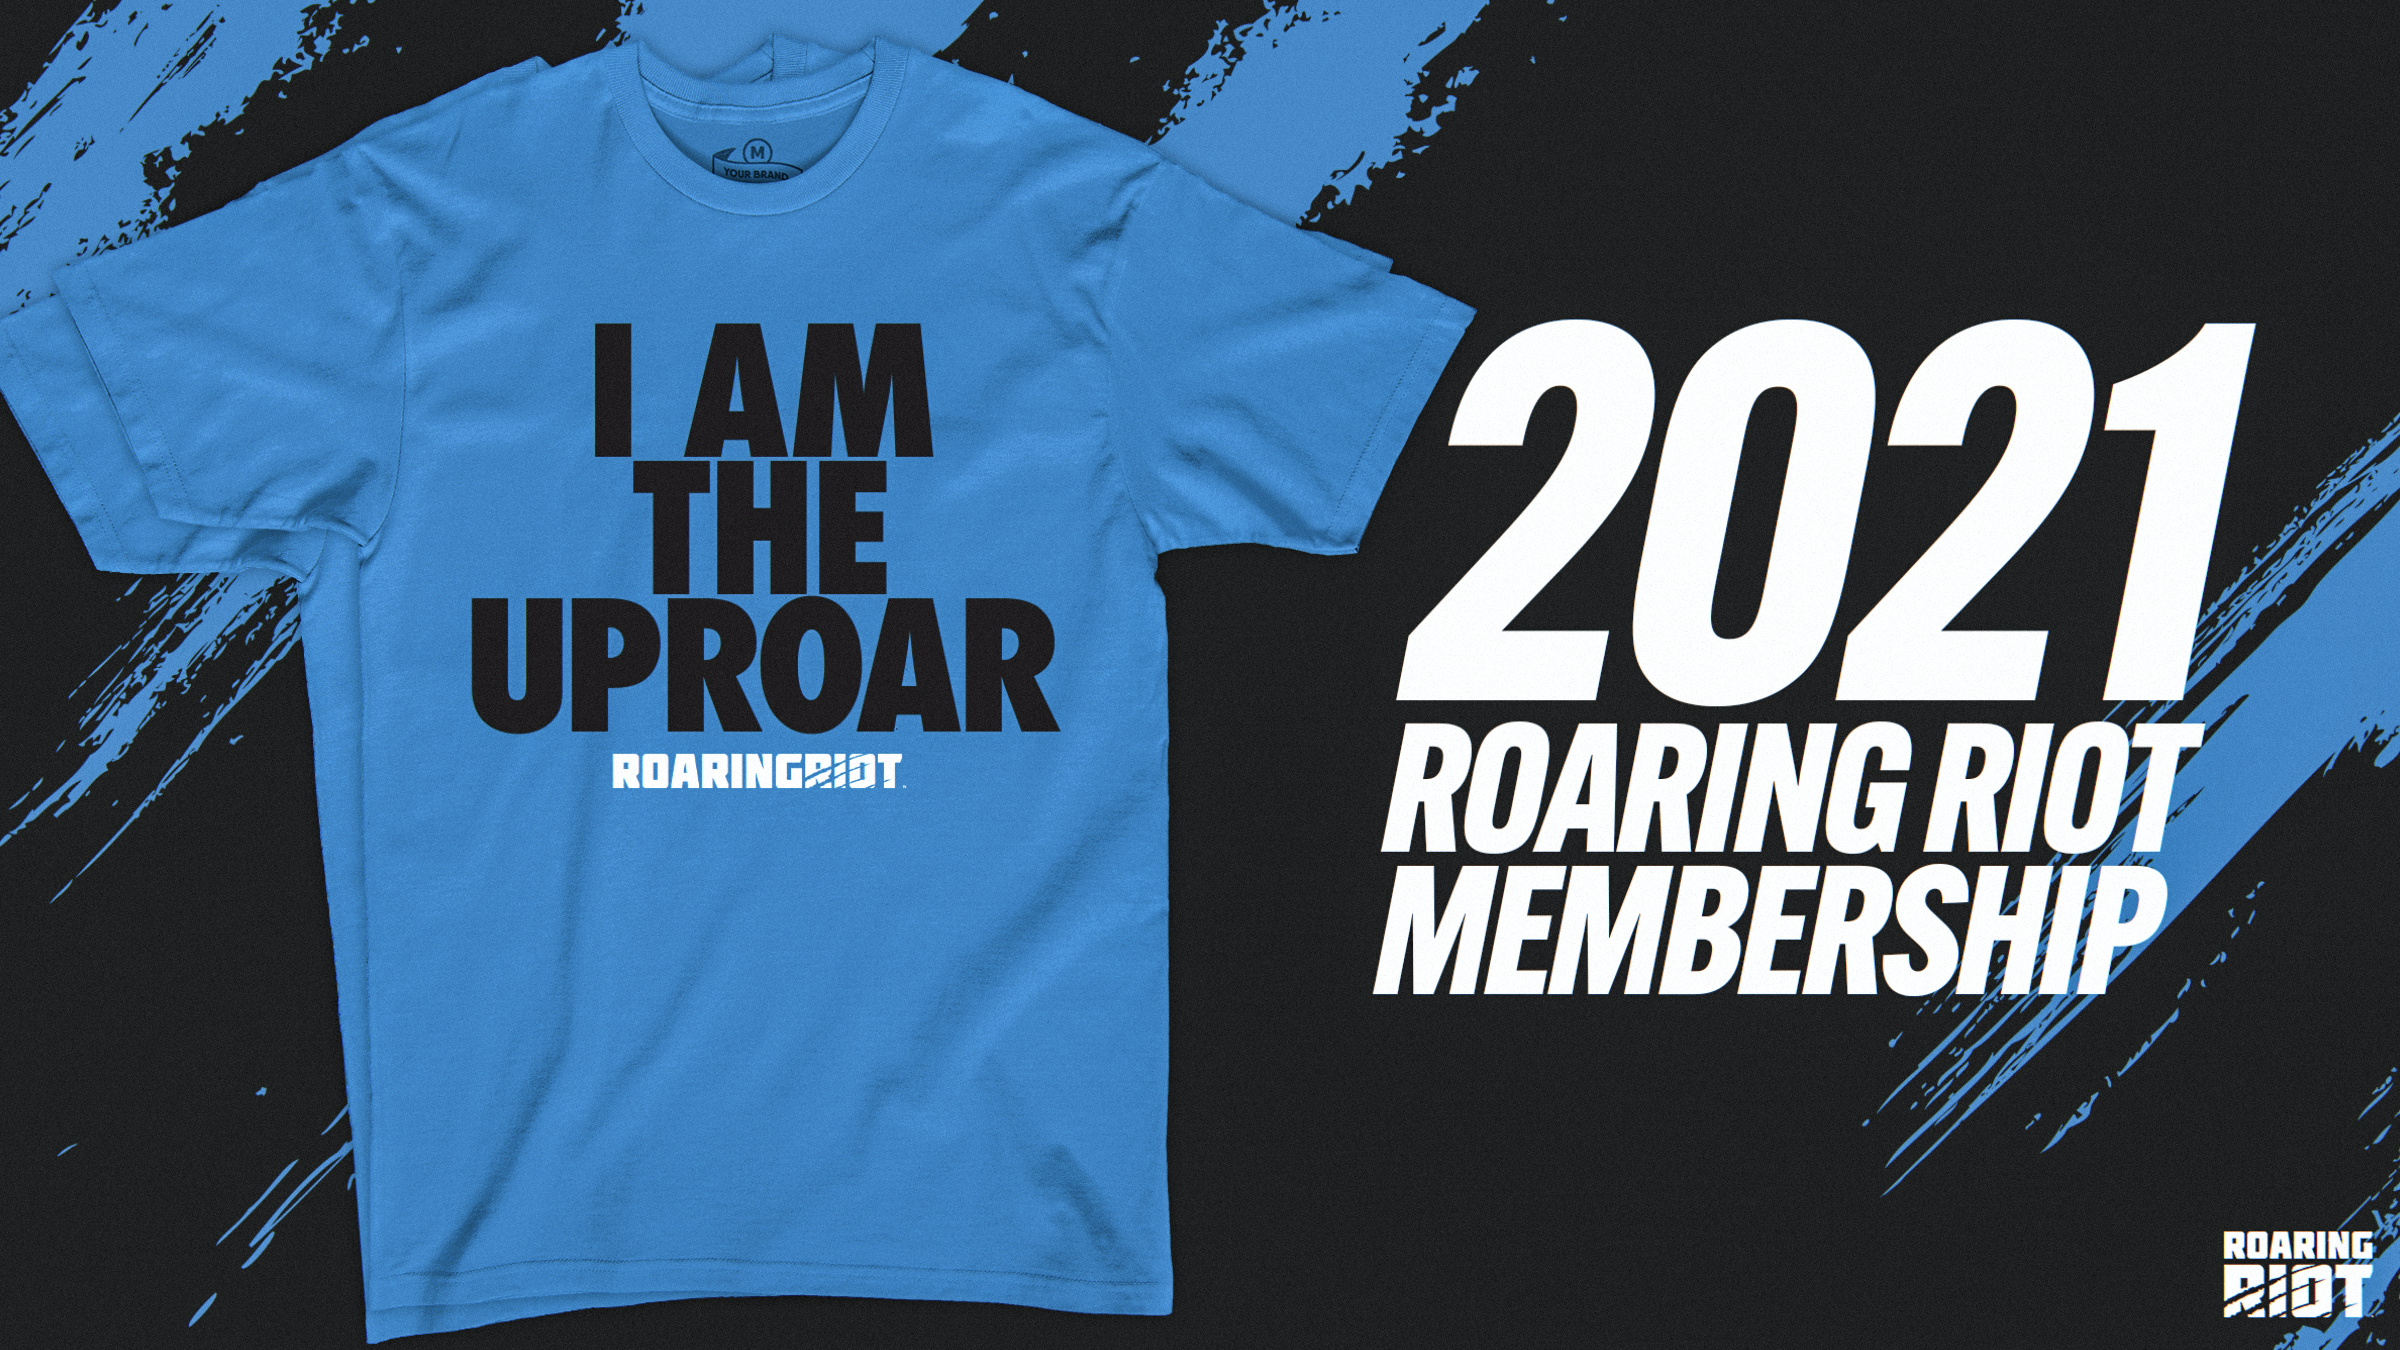 Be The Uproar: Your 2021 Roaring Riot Membership Shirt Is Here!